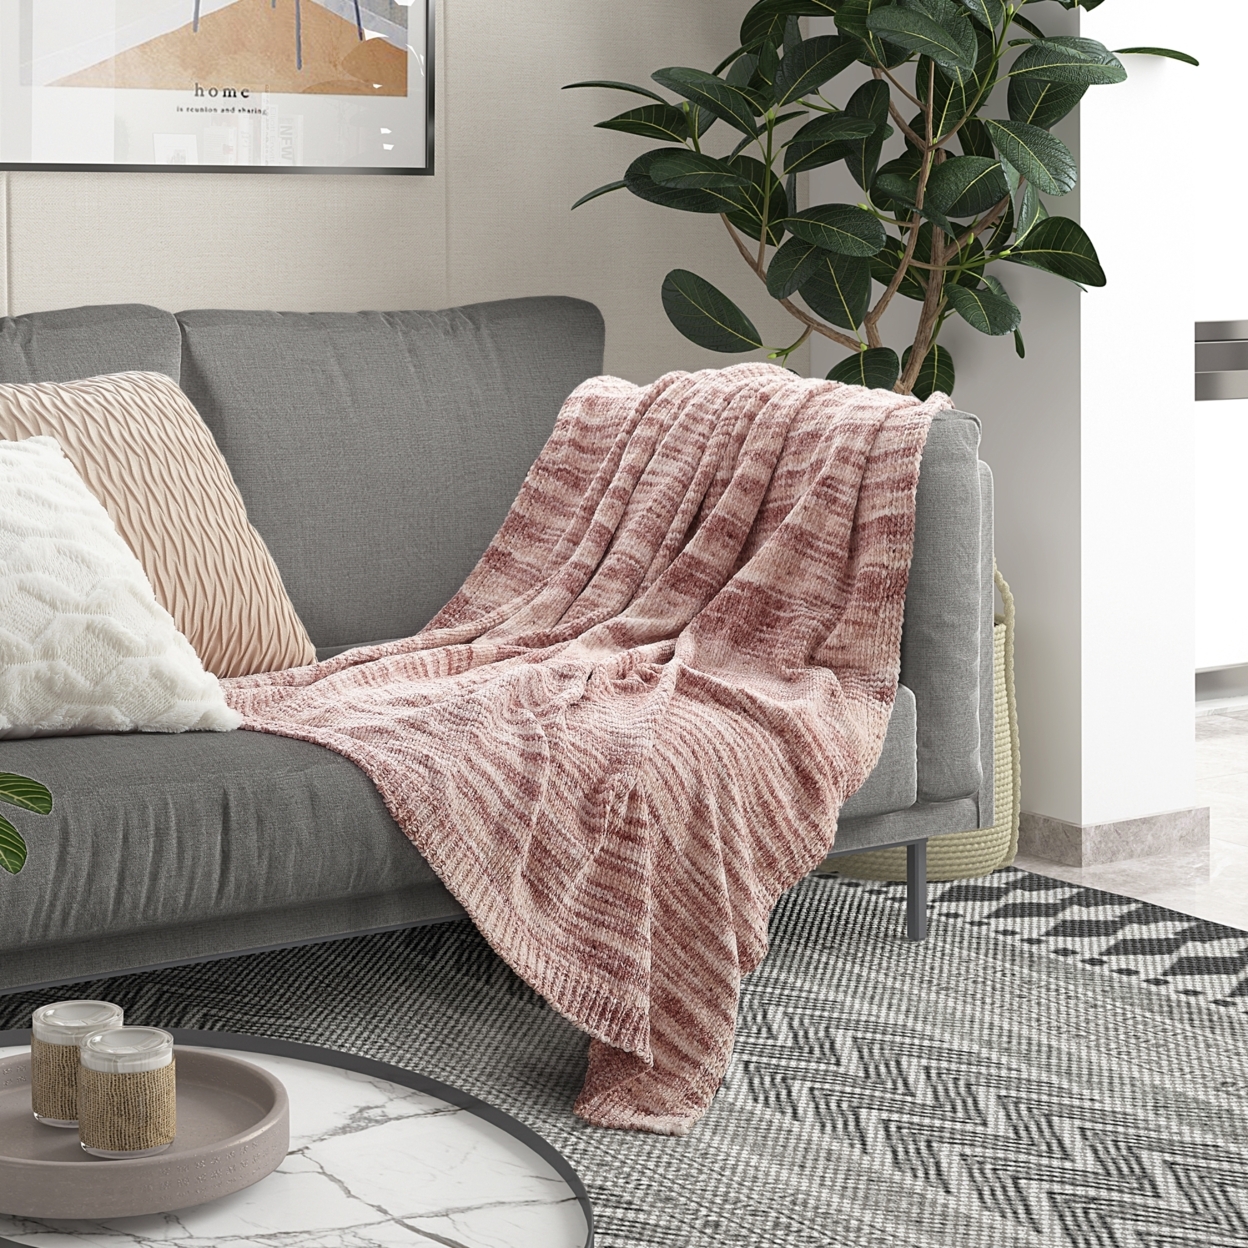 Malani Throw-Space Dye Chenille-Cozy And Lightweight-Soft - Blush